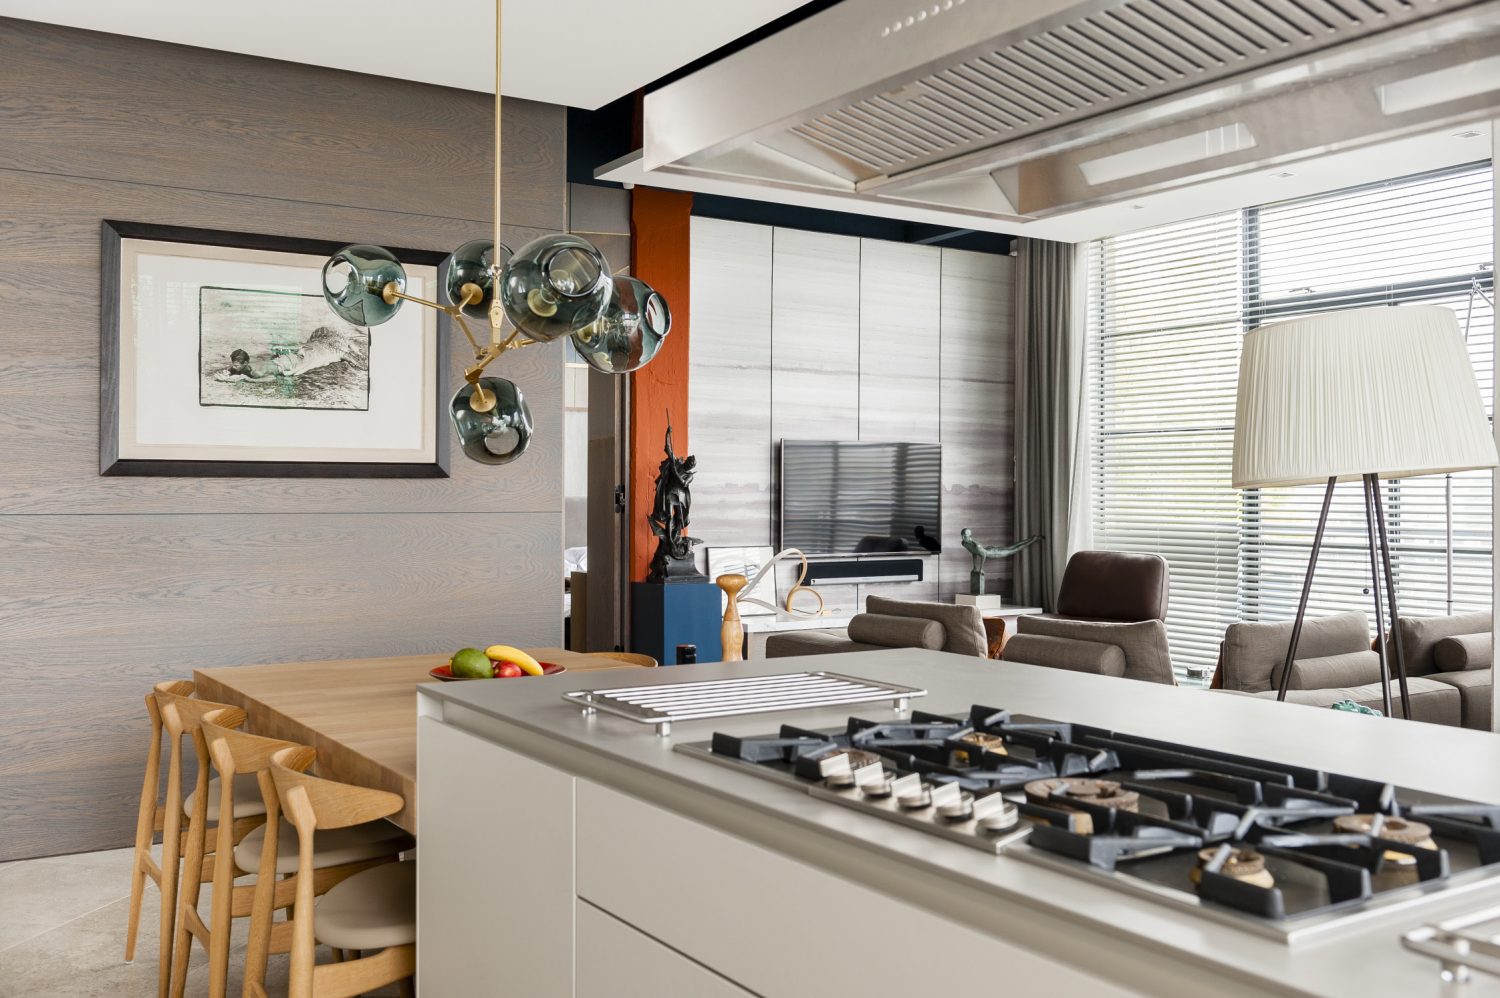 The Bulthaup kitchen is deceptively large for a one bedroomed apartment. “We had enough kitchen to go into a medium sized house, but it fits beautifully in this space,” says Mike